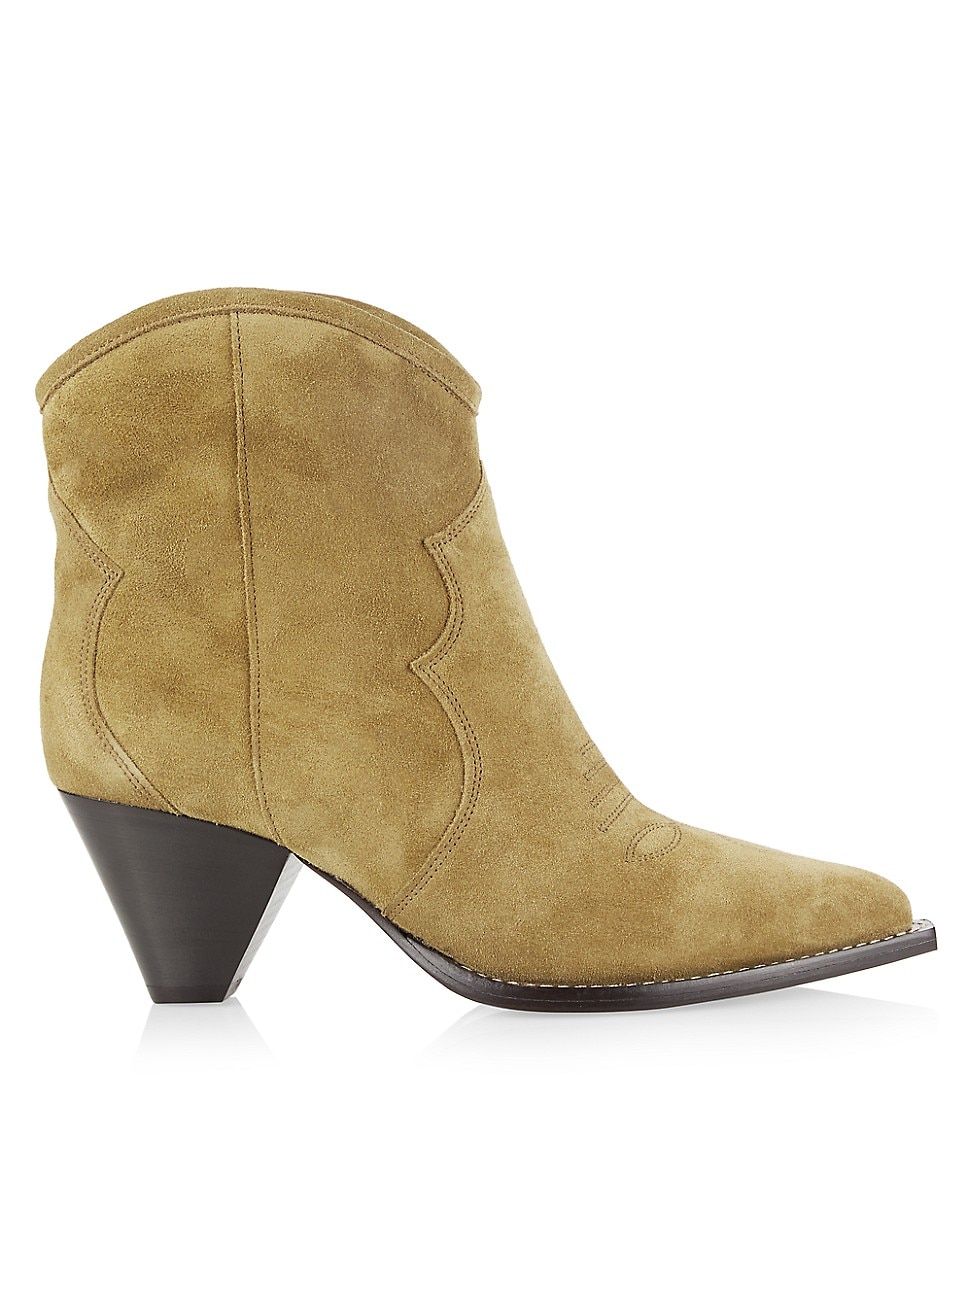 Women's Darizo Suede Booties - Taupe - Size 5 | Saks Fifth Avenue